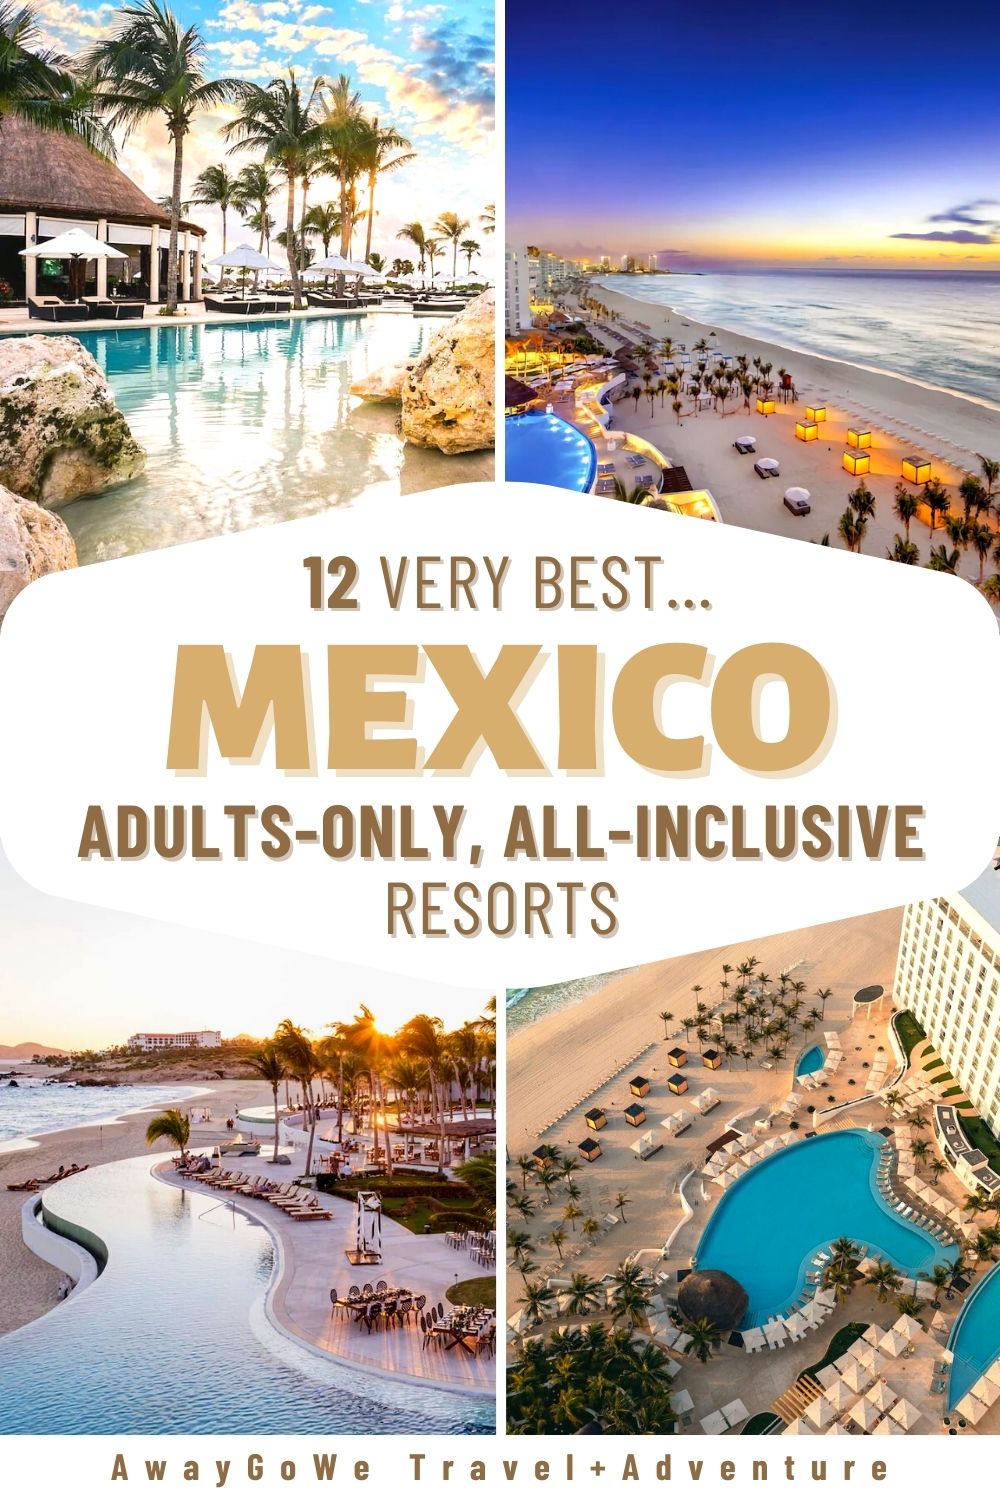 adults-only all-inclusive resorts in Mexico